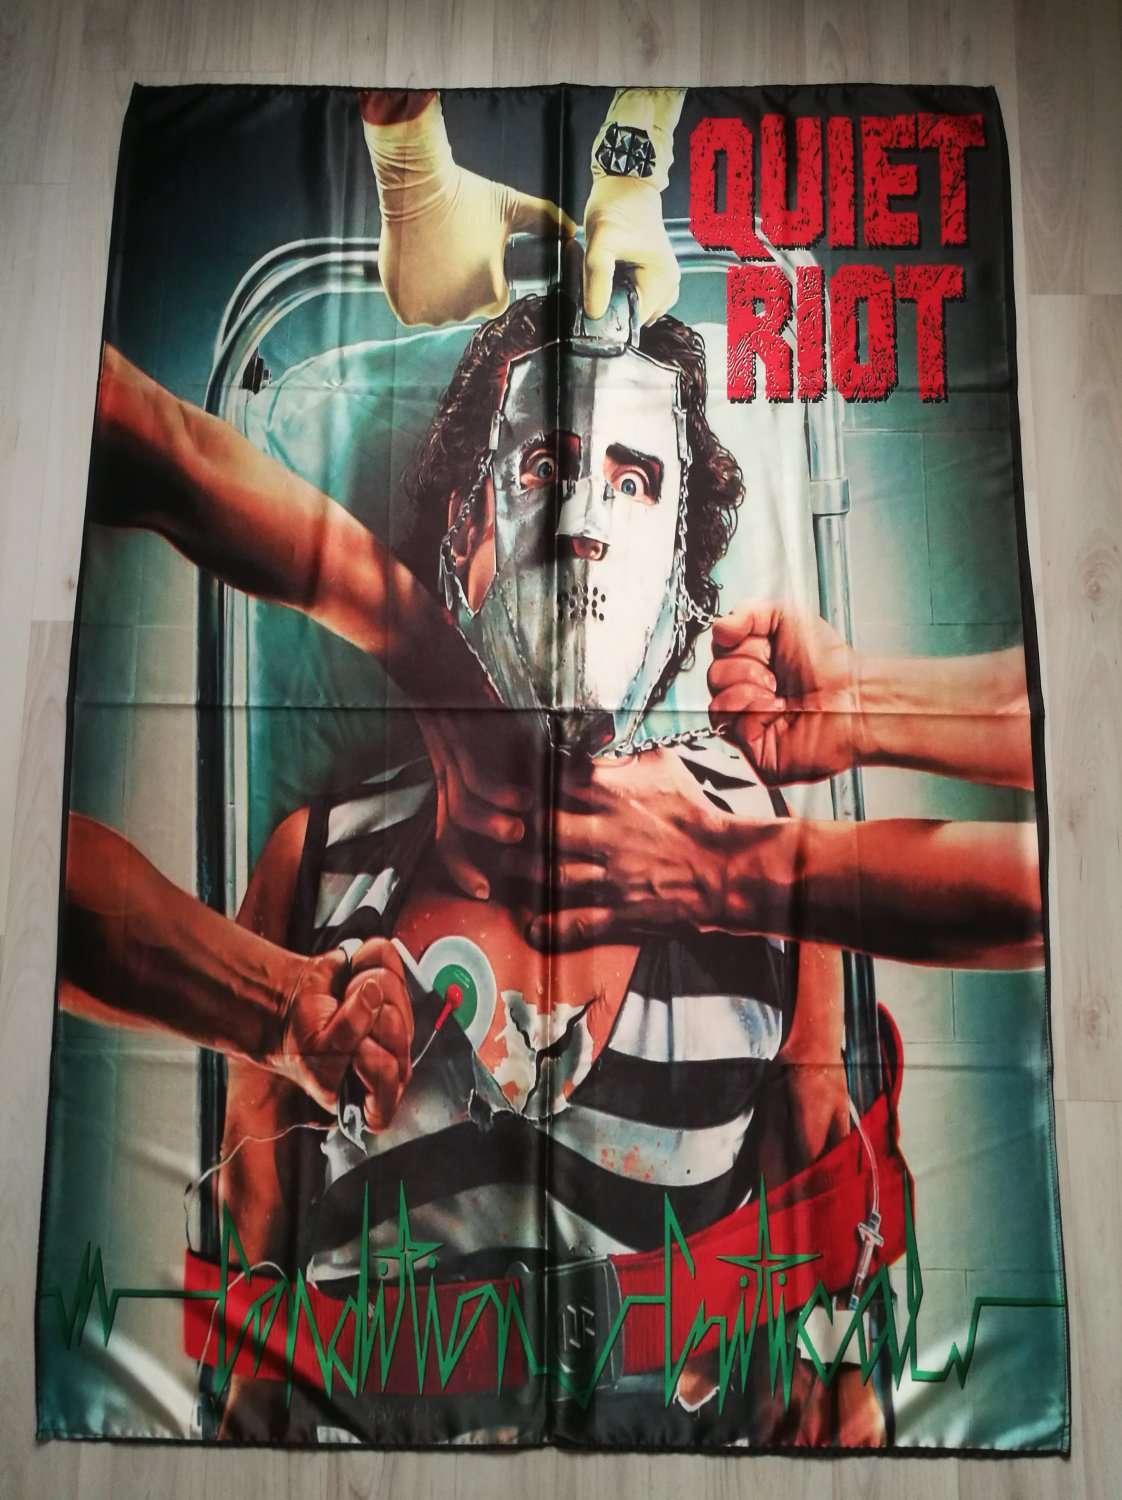 QUIET RIOT - Condition critical FLAG cloth POSTER Banner Heavy METAL Def leppard